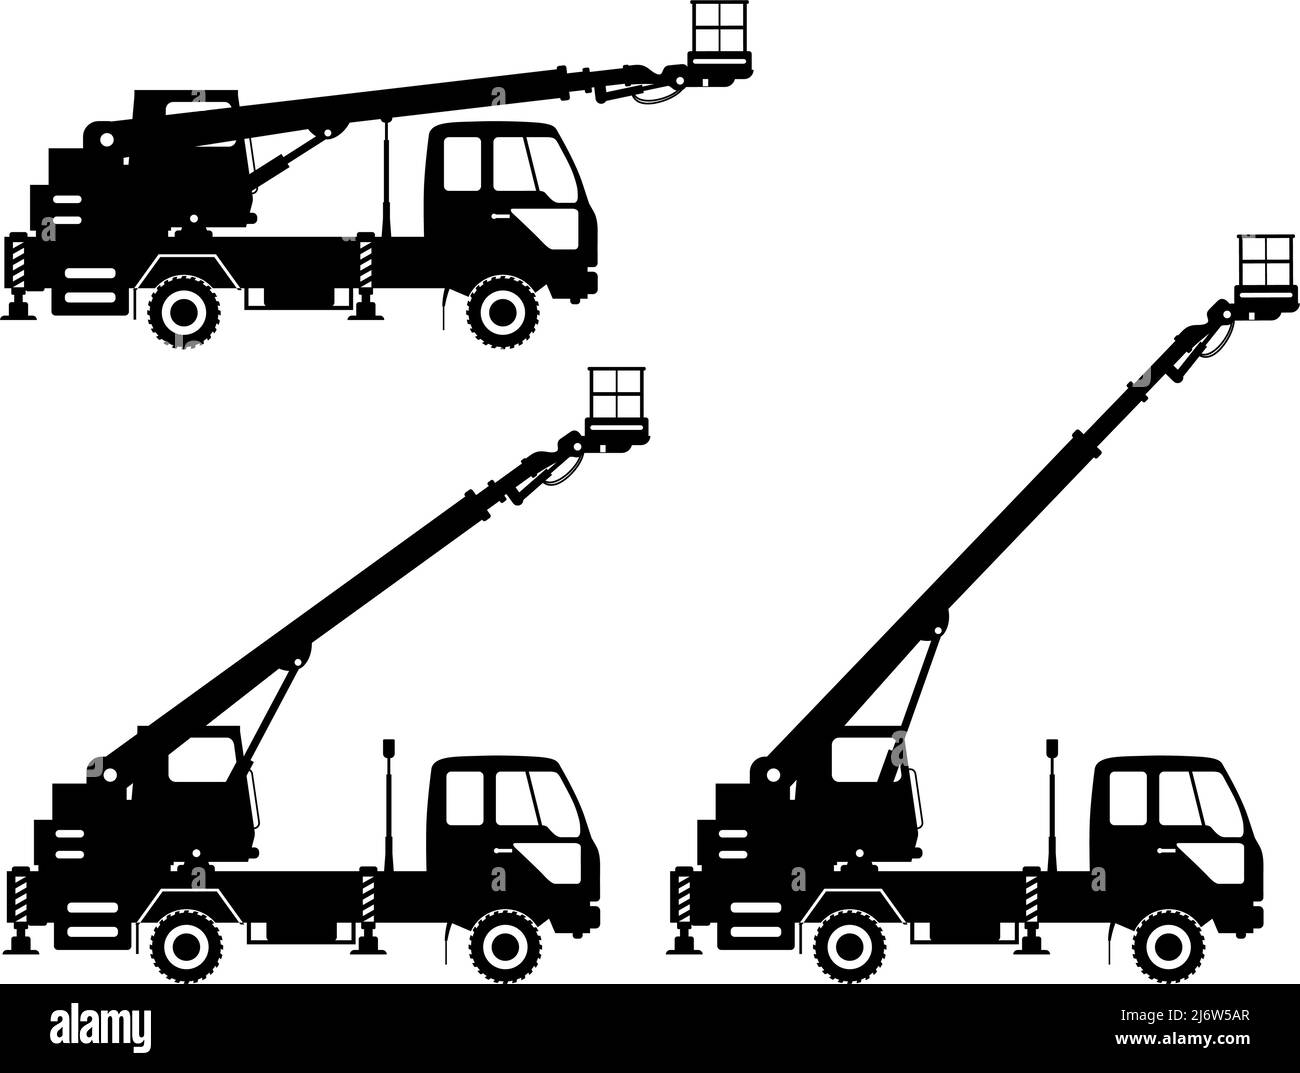 Silhouette of aerial platform truck. Heavy construction machine. Heavy equipment and machinery. Vector illustration. Stock Vector